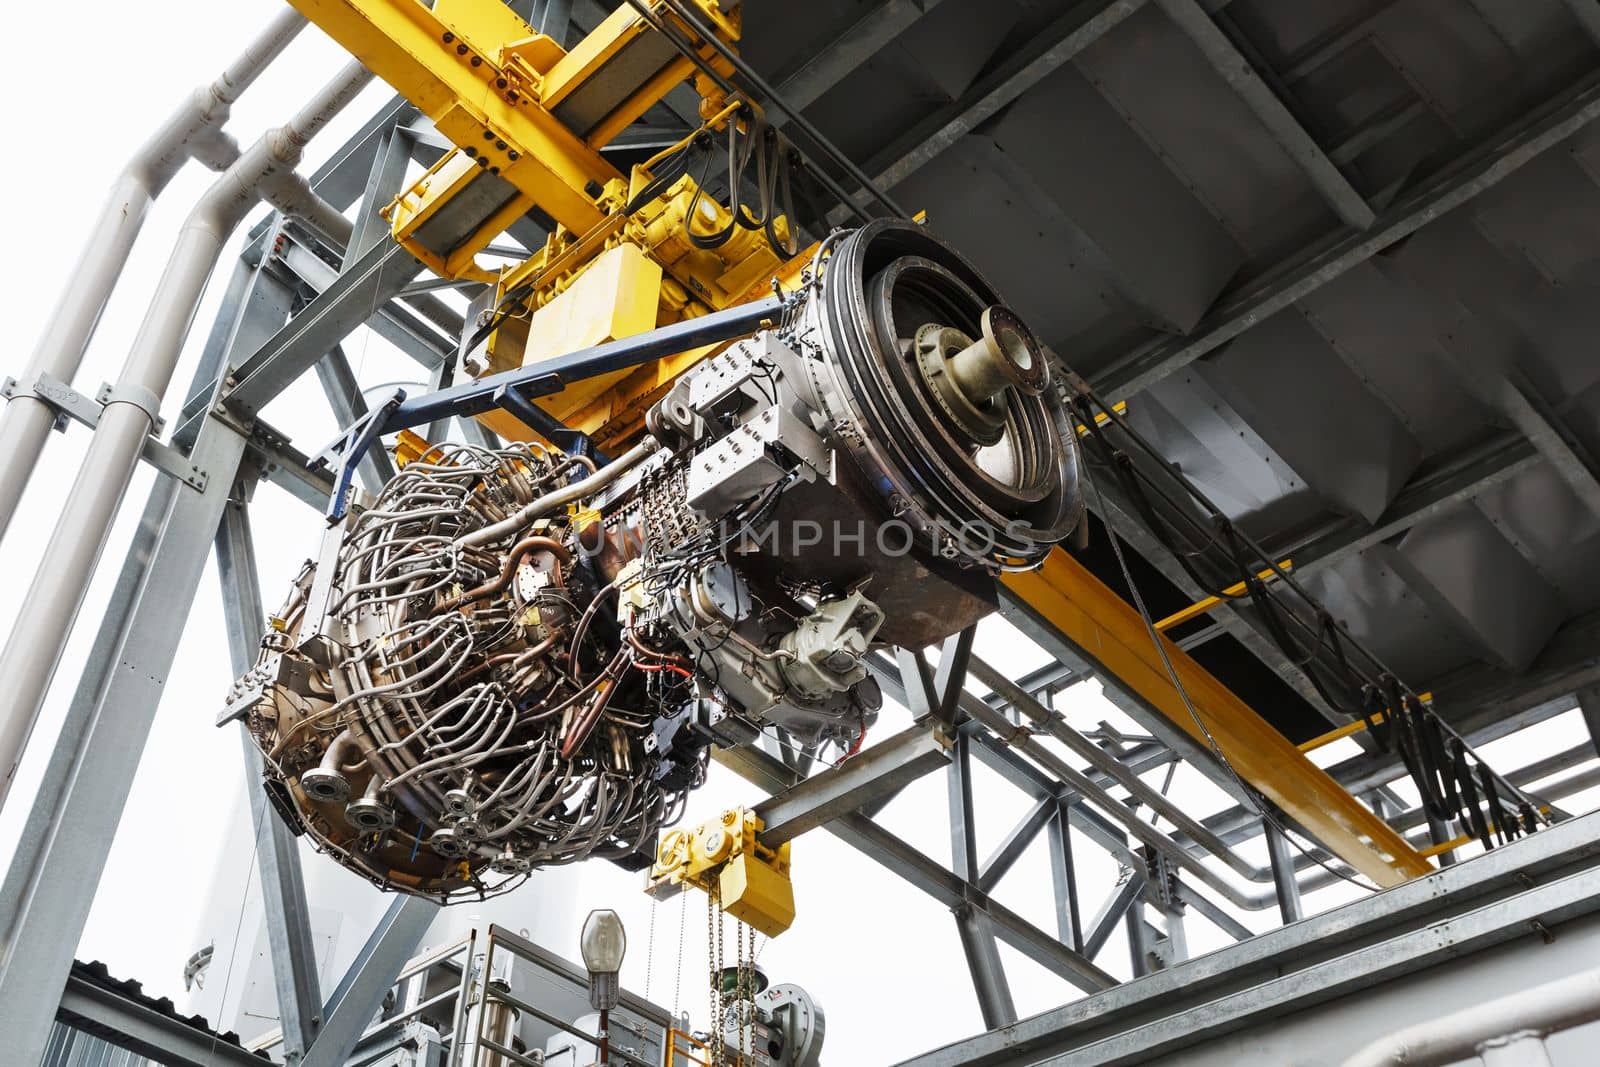 The engine of a gas turbine compressor hangs on a crane during installation in a module for generating electricity